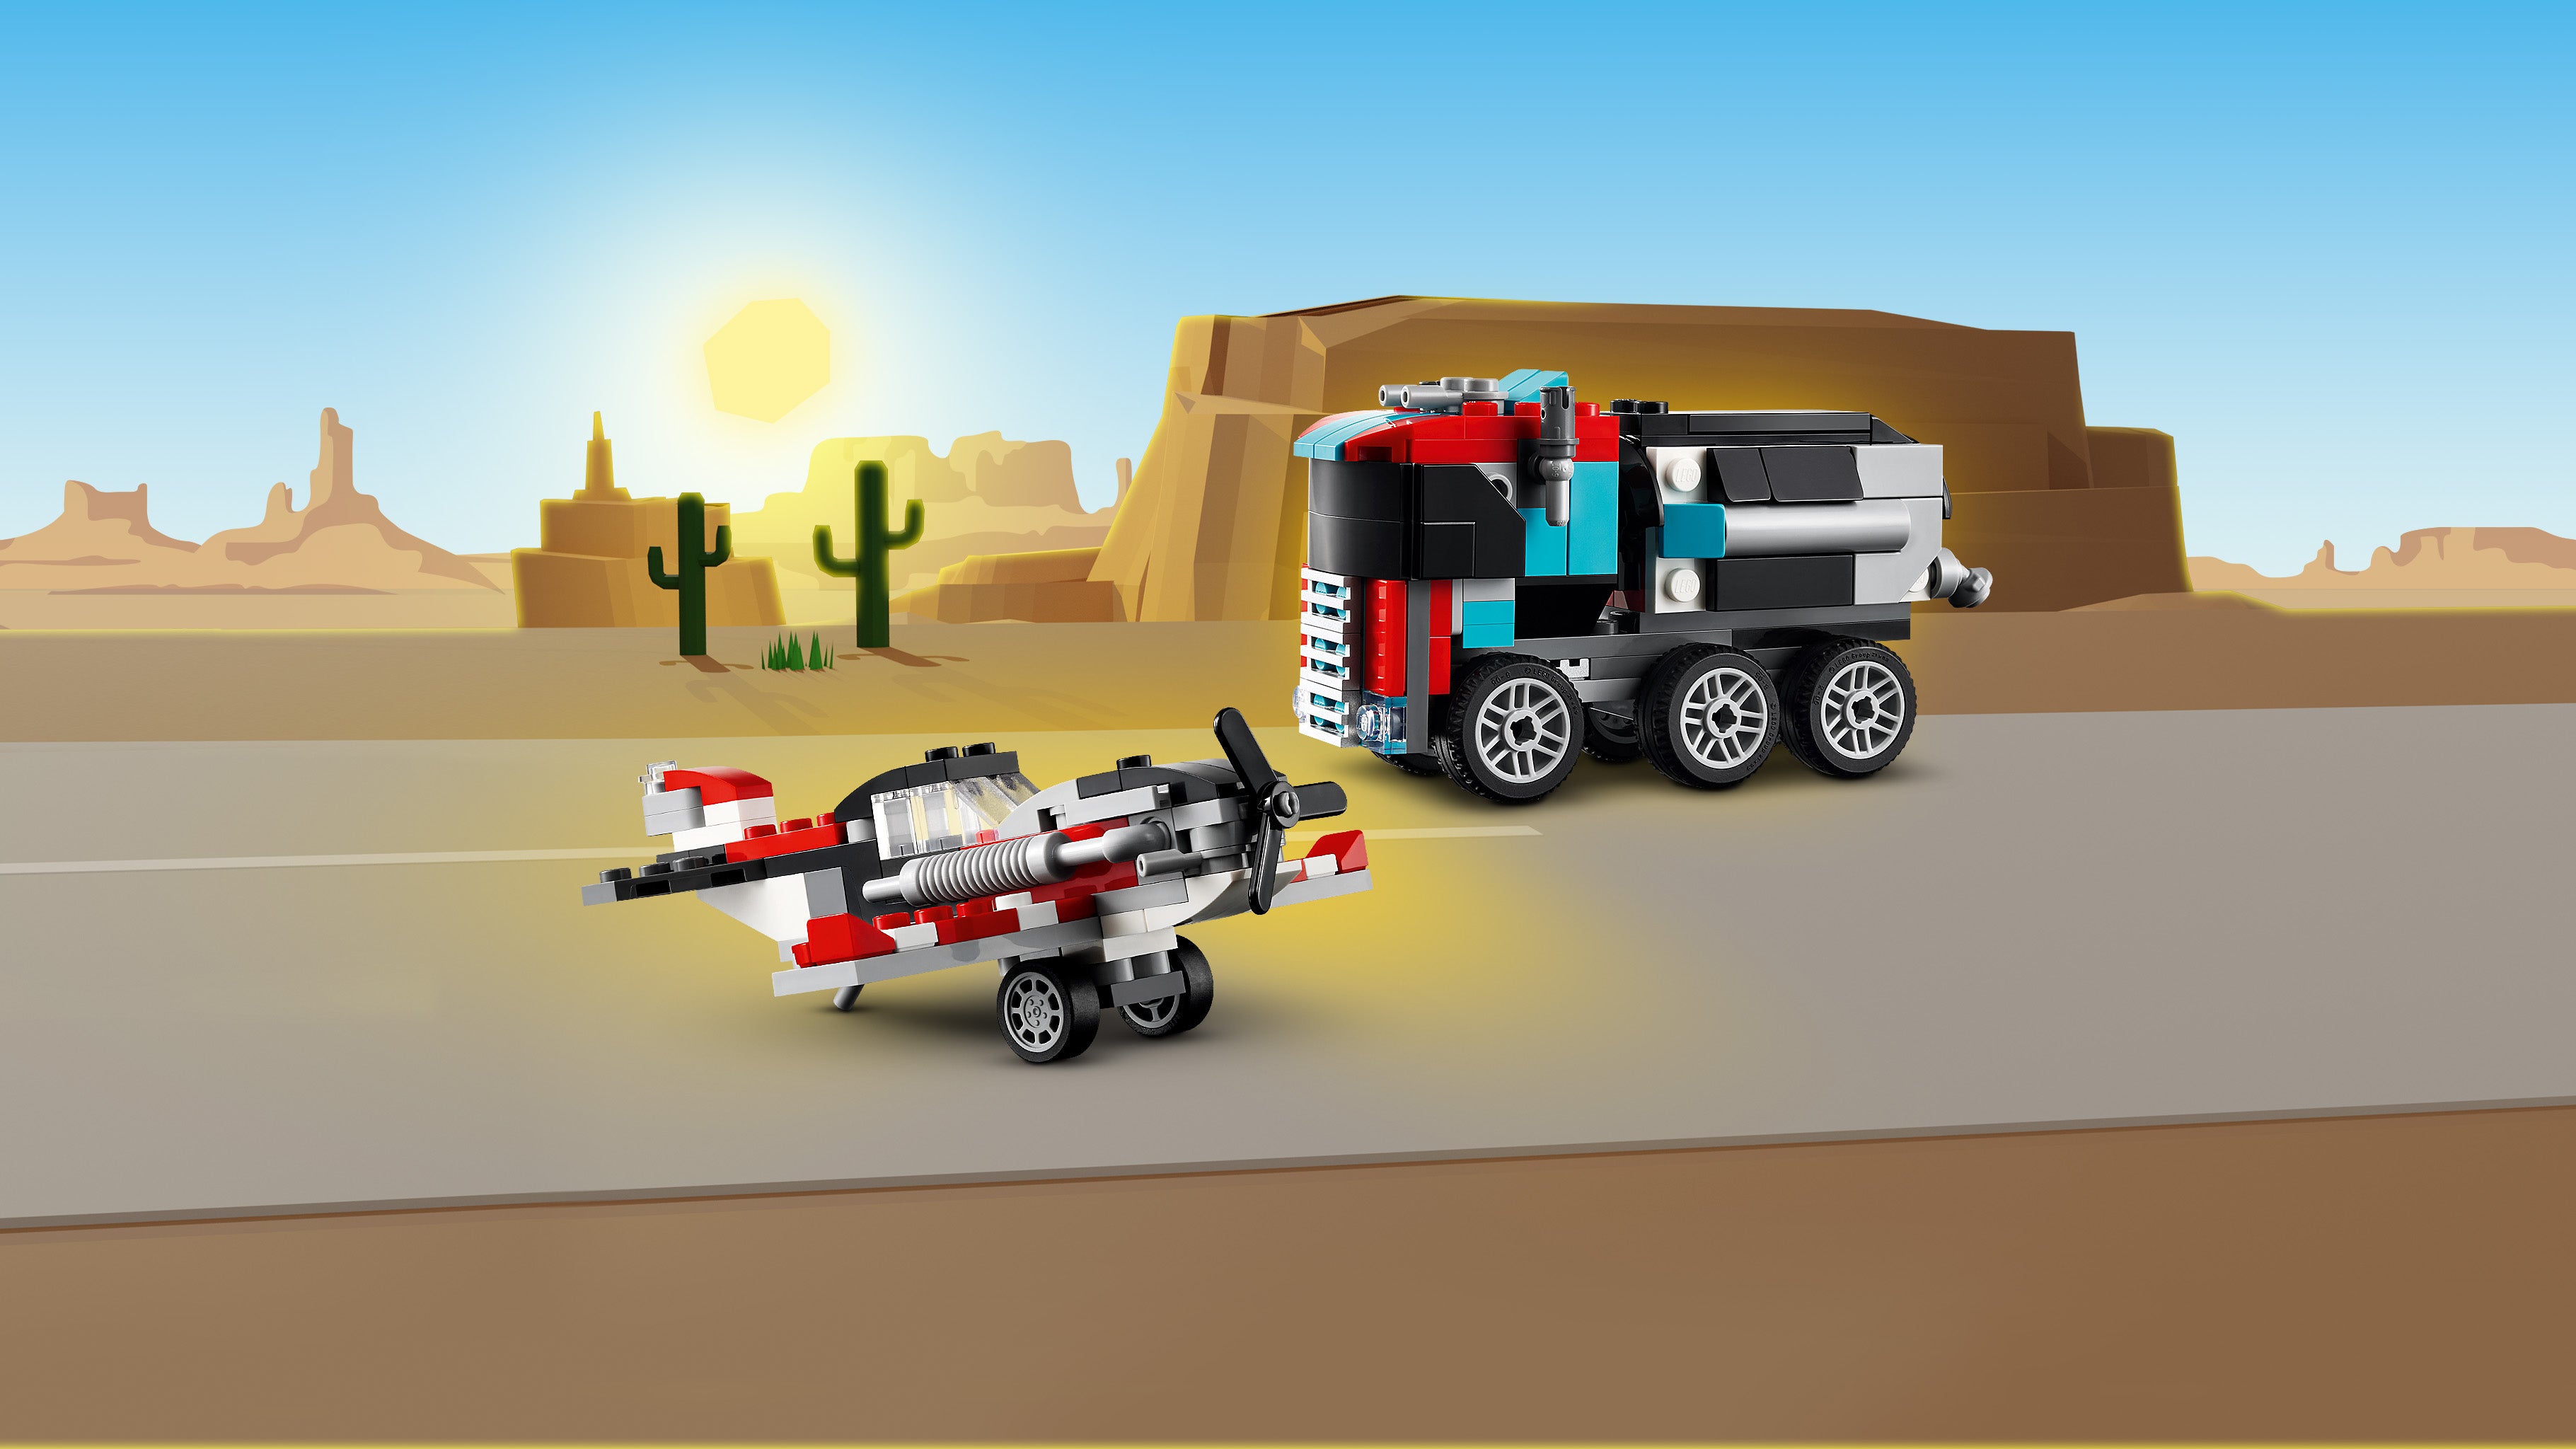 Lego 31146 Flatbed Truck with Helicopter